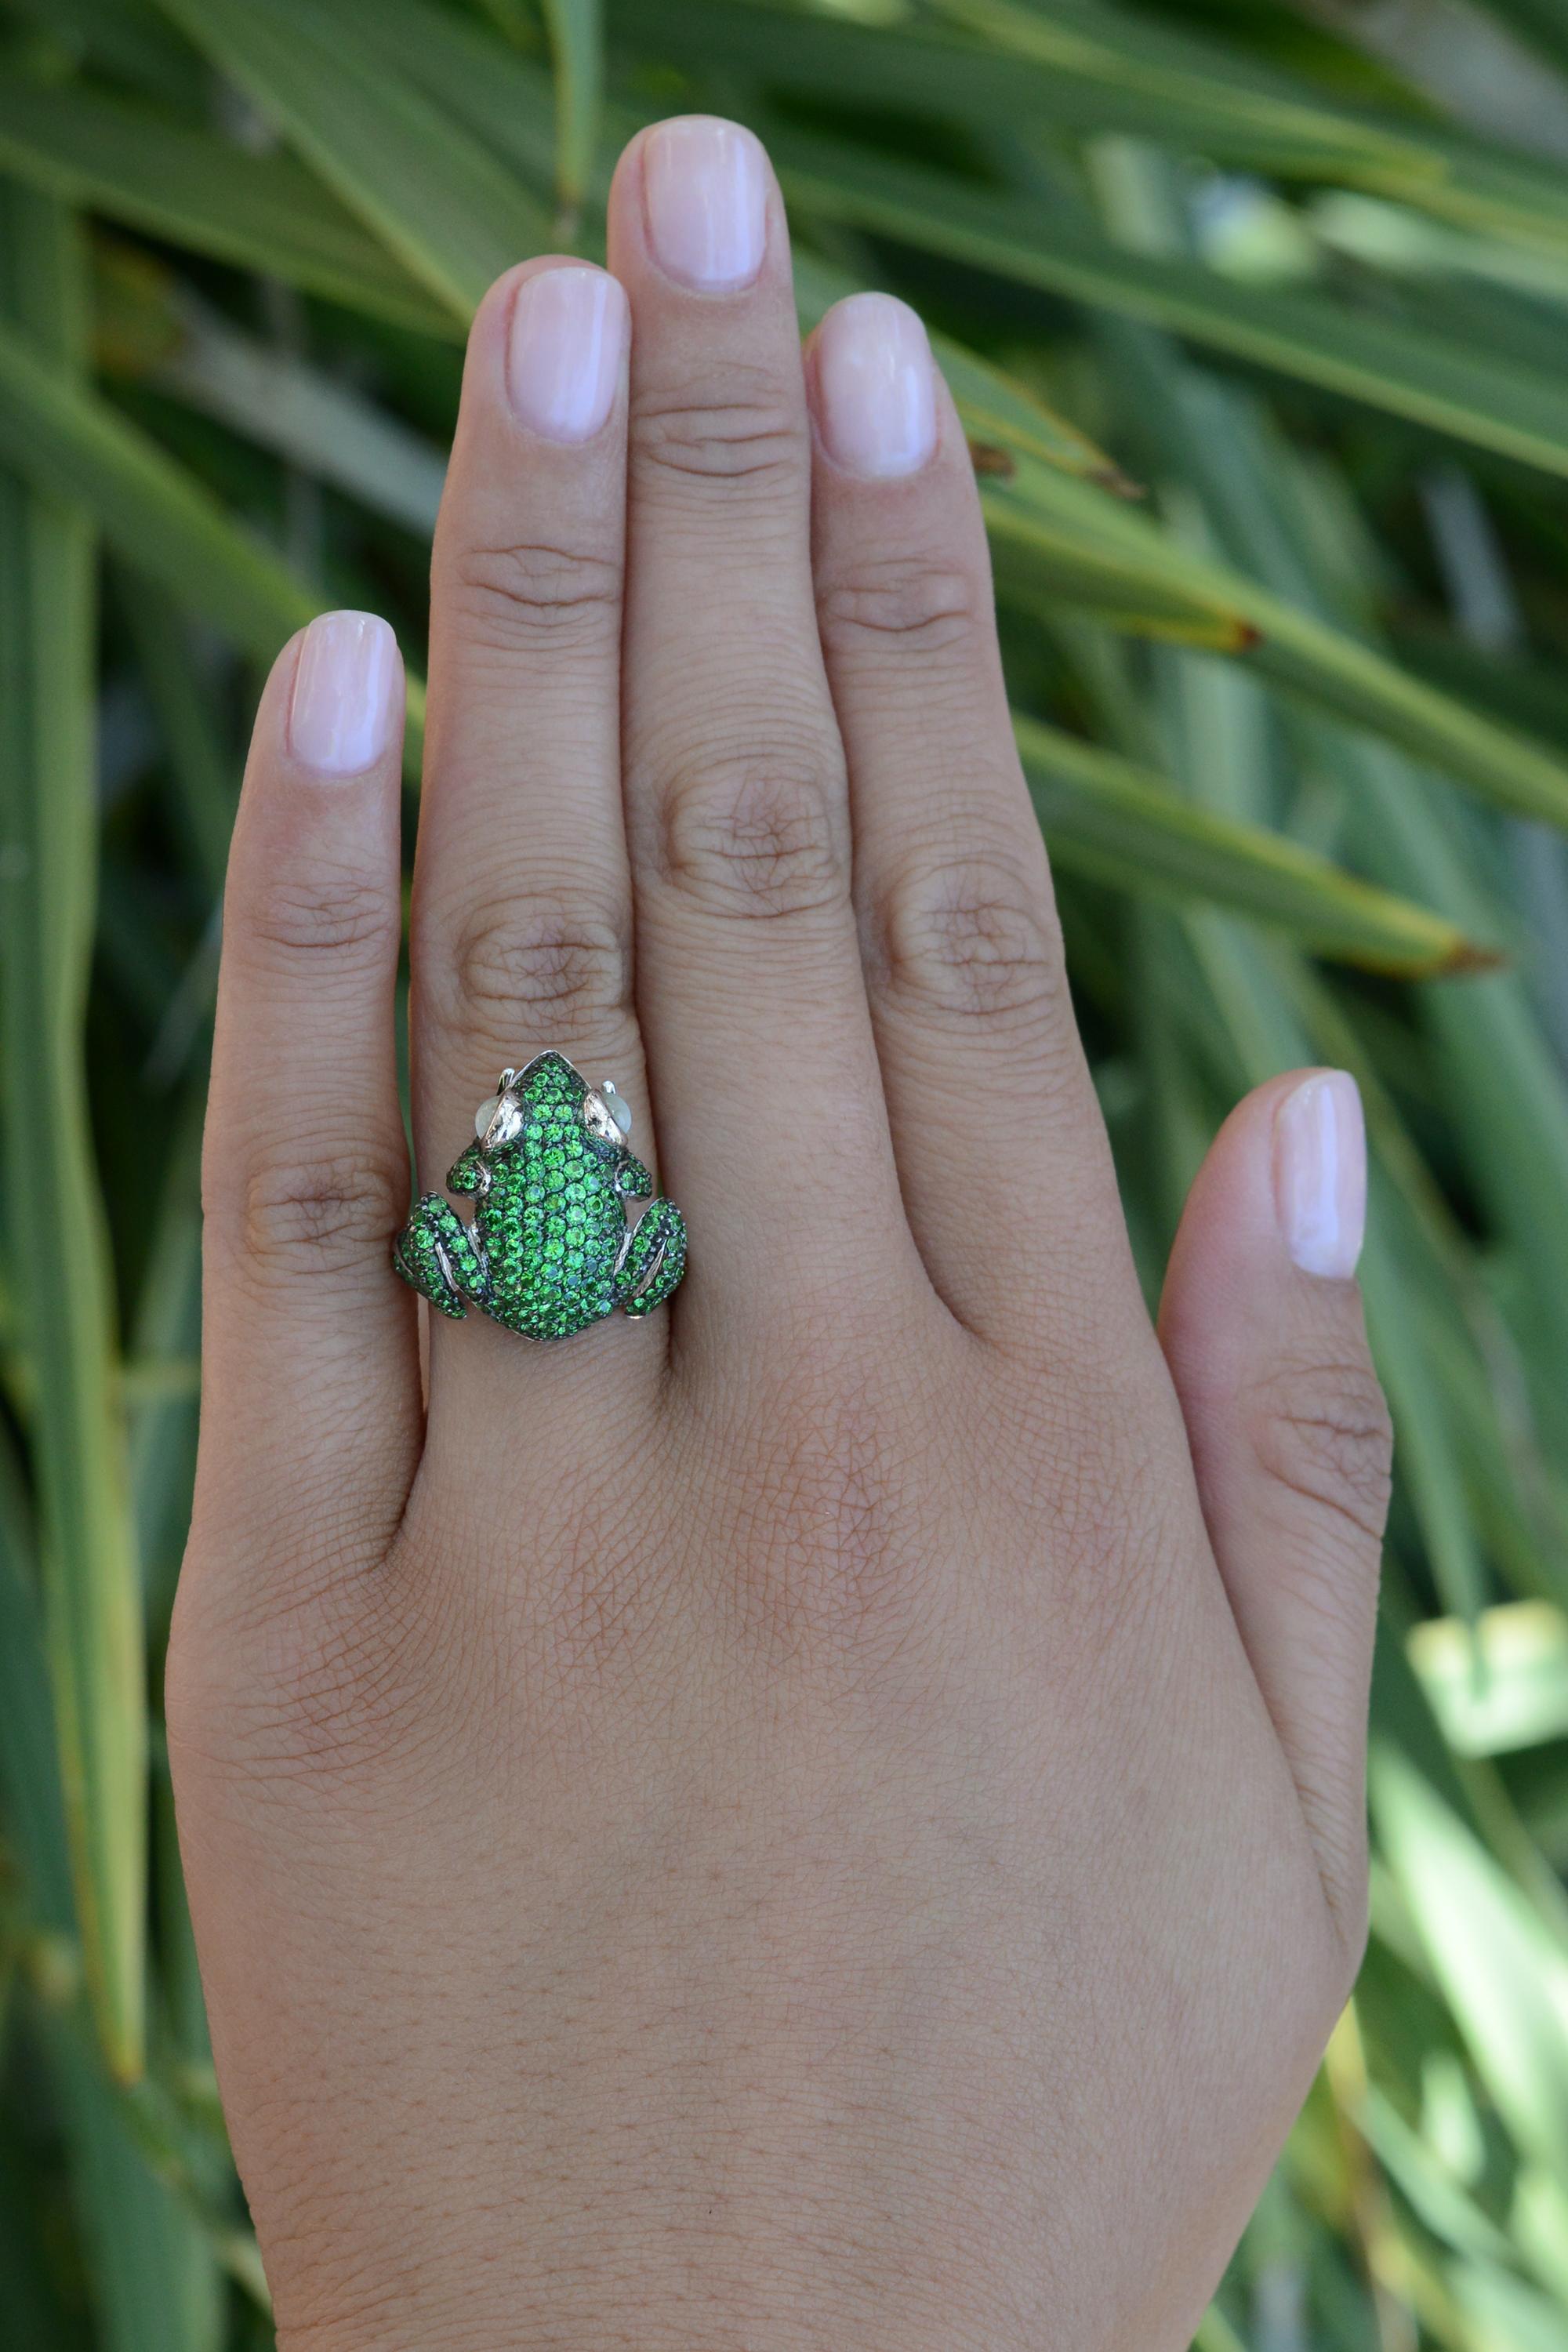 Your search for eccentric vintage estate rings finishes upon a luxurious lily pad. A captivating combination of tsavorite and cat's eye chrysoberyl gems fashioned into a bespoke frog makes a curious and entertaining splash. The luxurious 18 karat